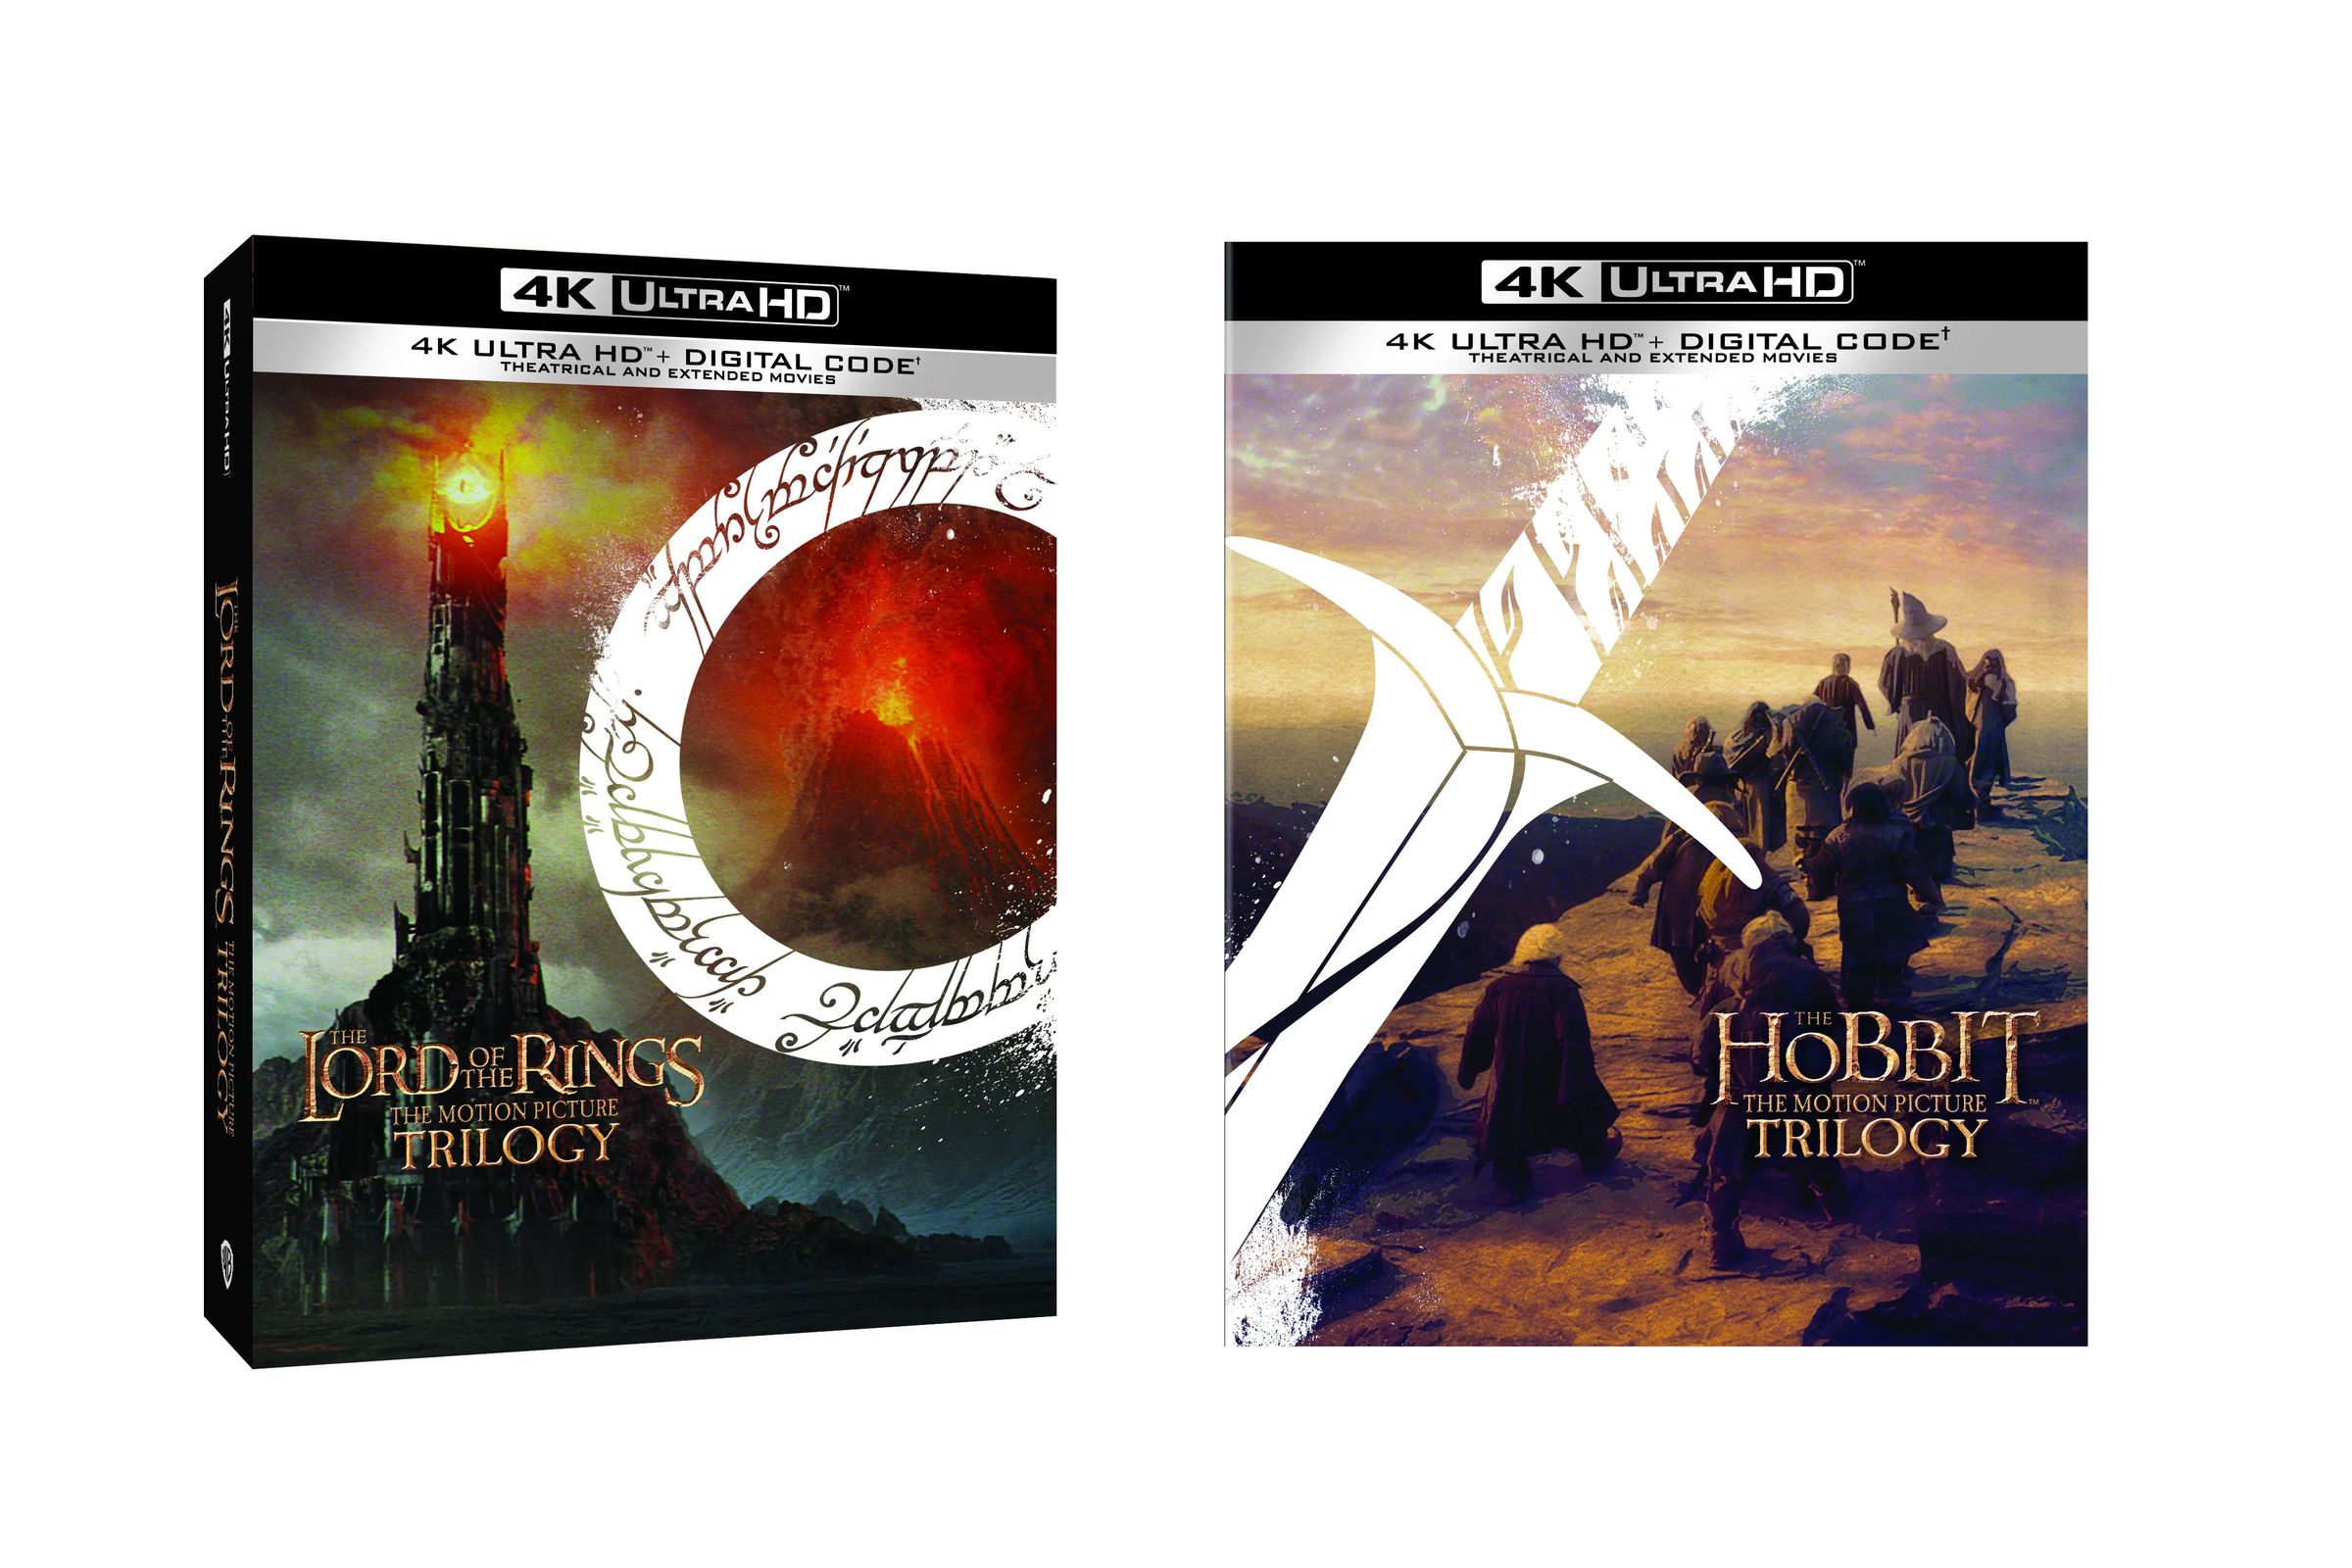 If you’re lucky, you can save on both the LOTR Trilogy and The Hobbit Trilogy on 4K Blu-ray